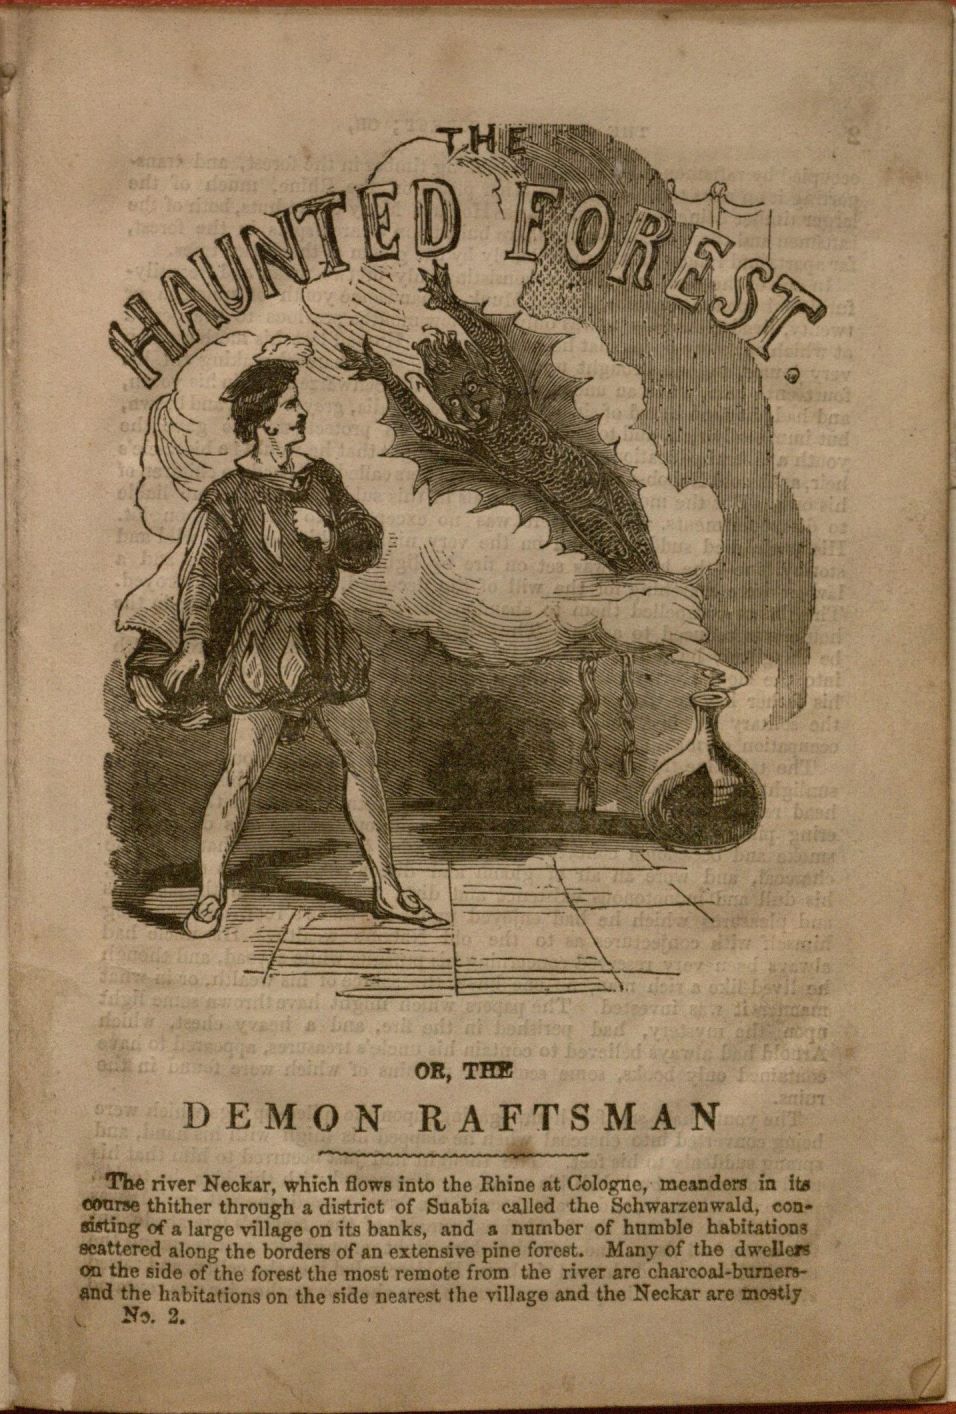 First page of the penny dreadful titled The haunted forest, or, The demon raftsman. Published in London by G. Purkess circa1853. Special Collections, B1251.